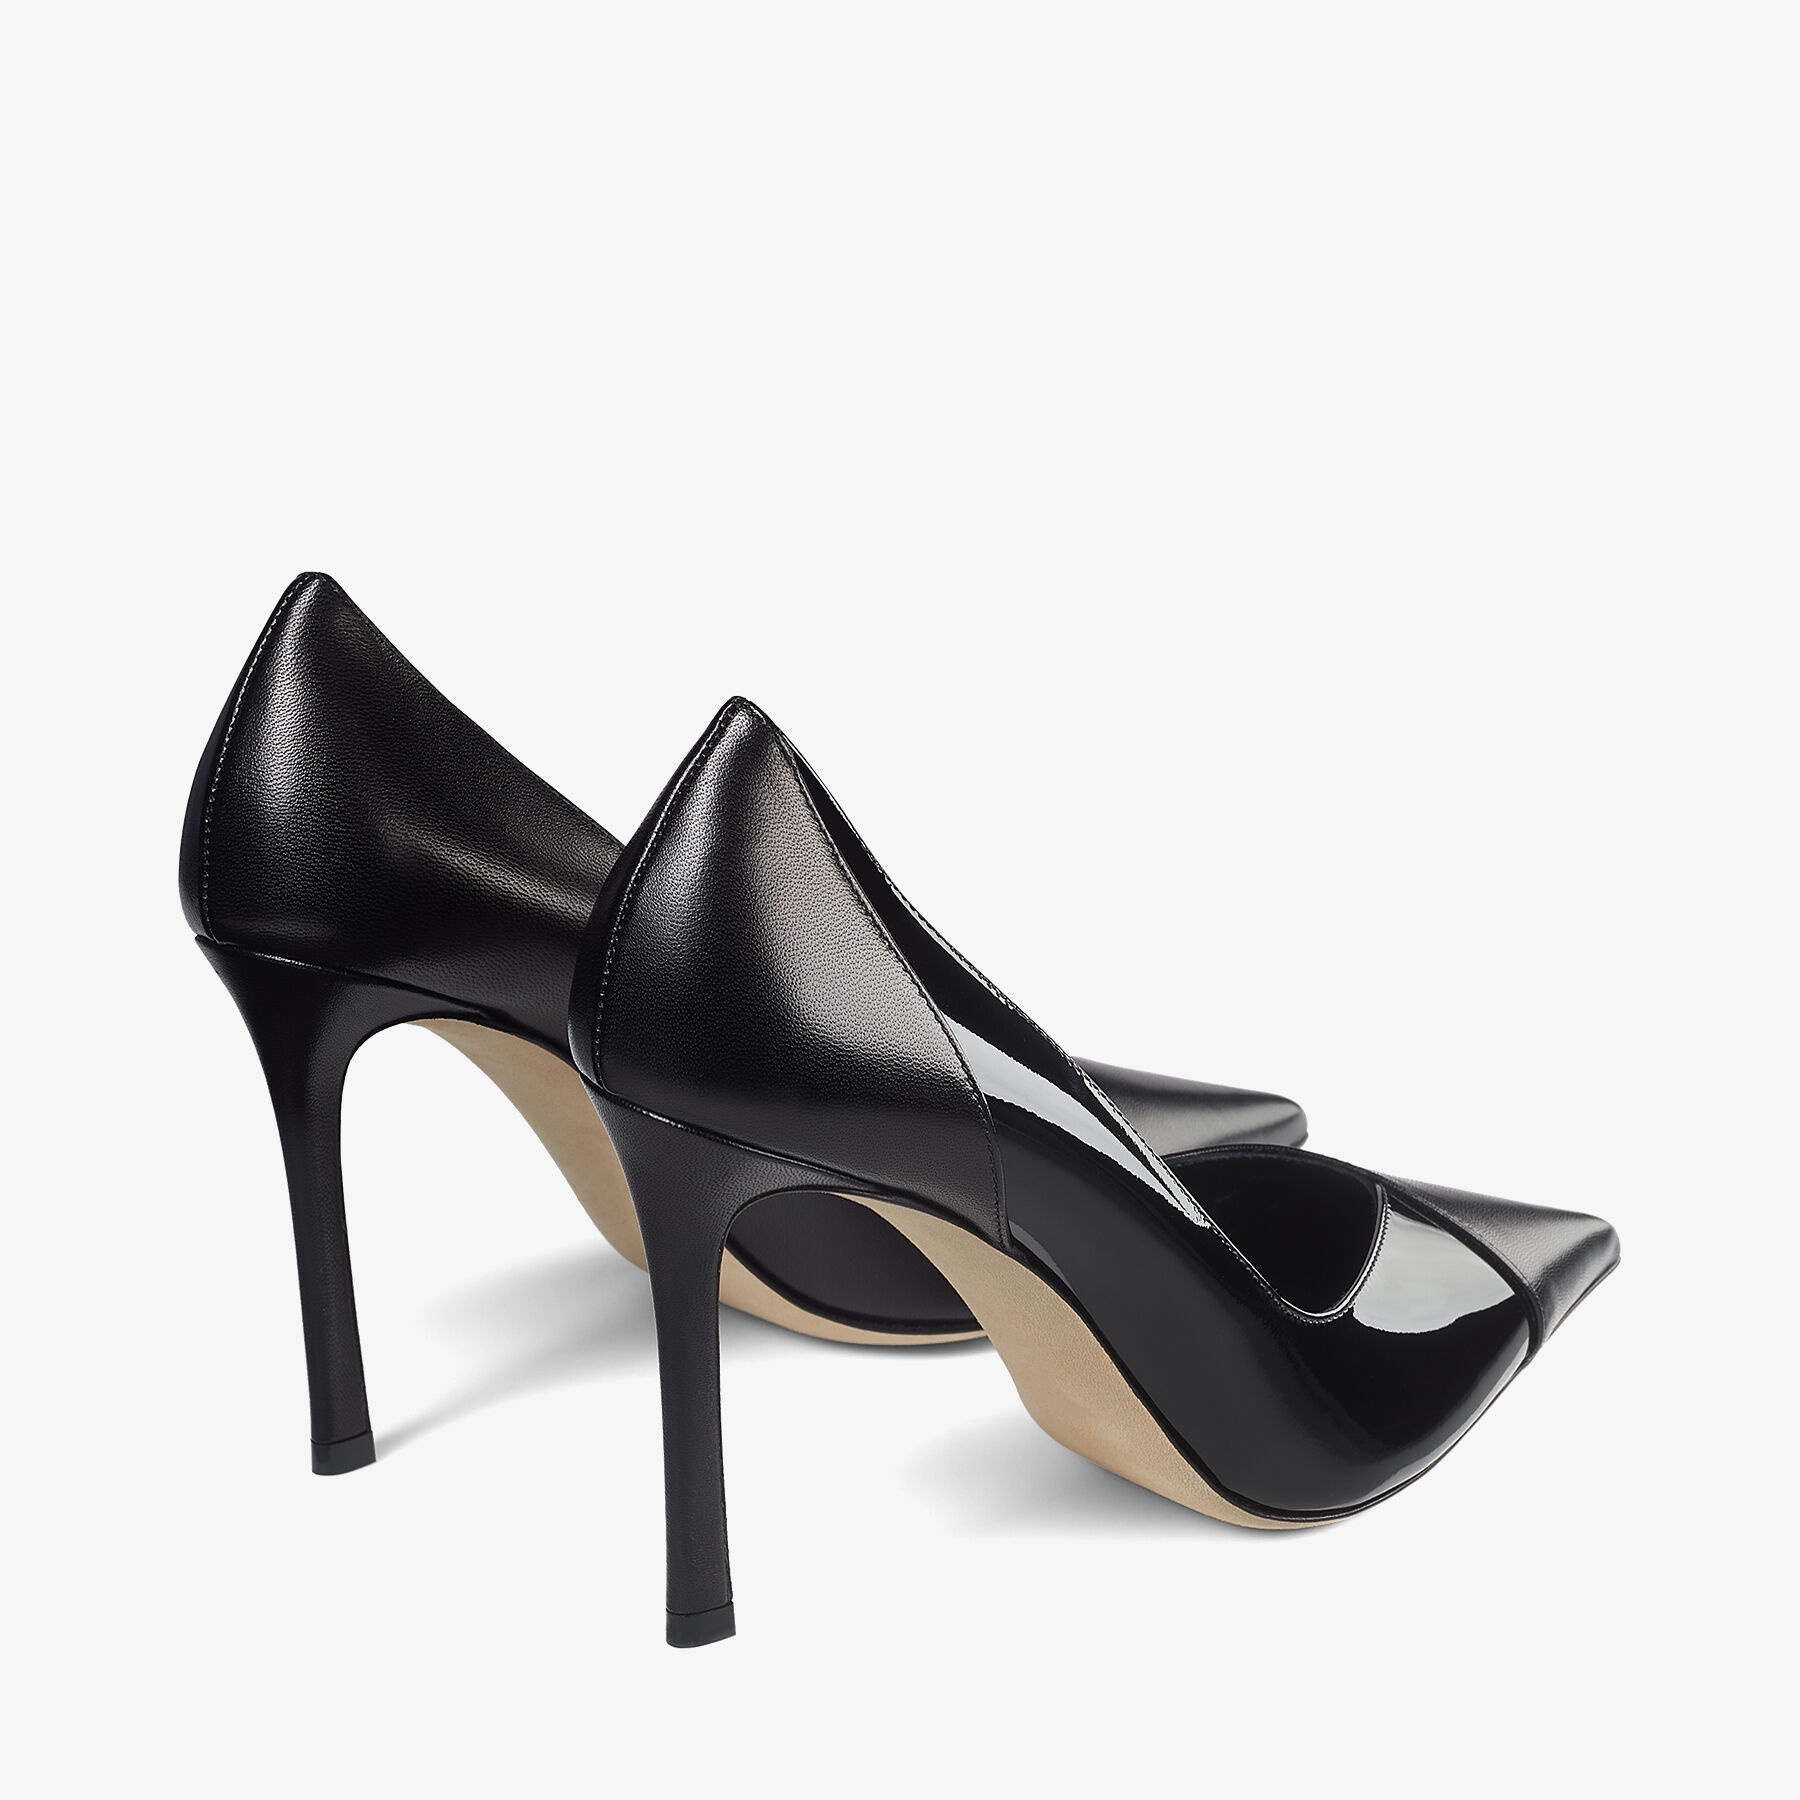 Cass 95
Black Nappa and Patent Leather Pumps - 5